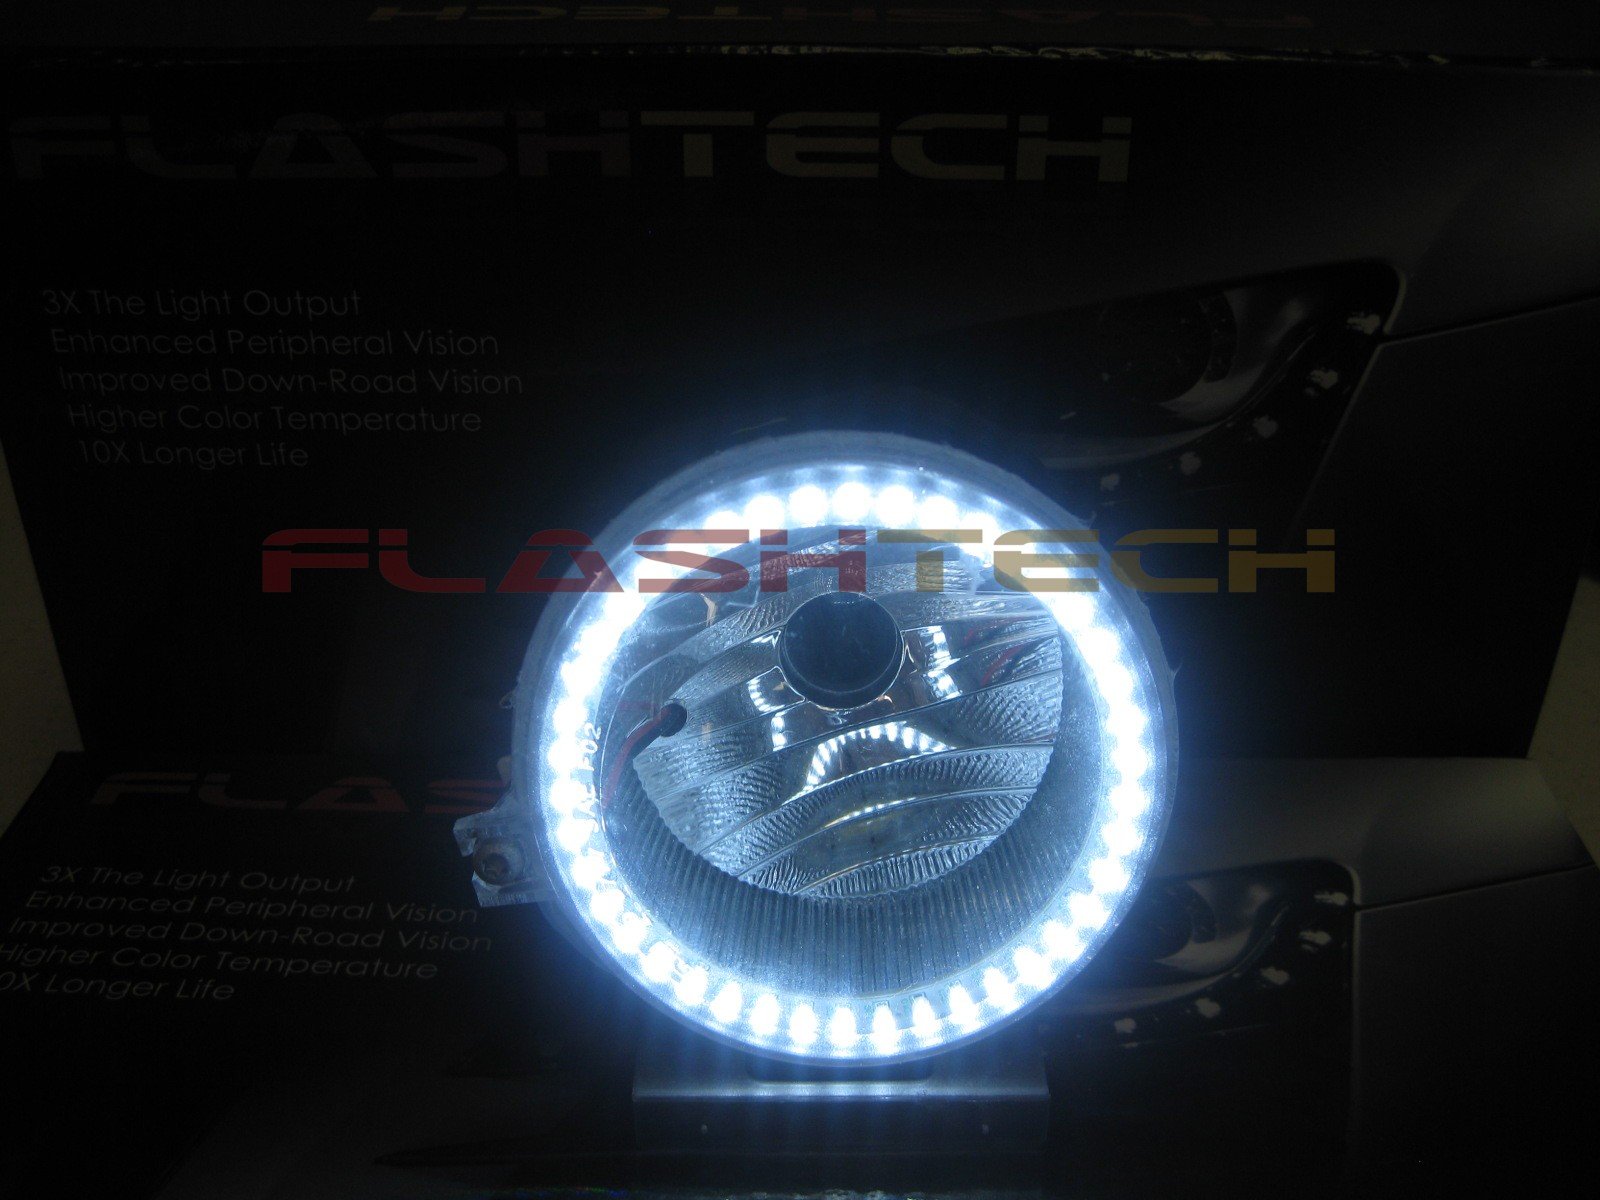 Dodge-Charger-2005, 2006, 2007, 2008, 2009, 2010-LED-Halo-Headlights and Fog Lights-White-RF Remote White-DO-CR60510-WHFRF